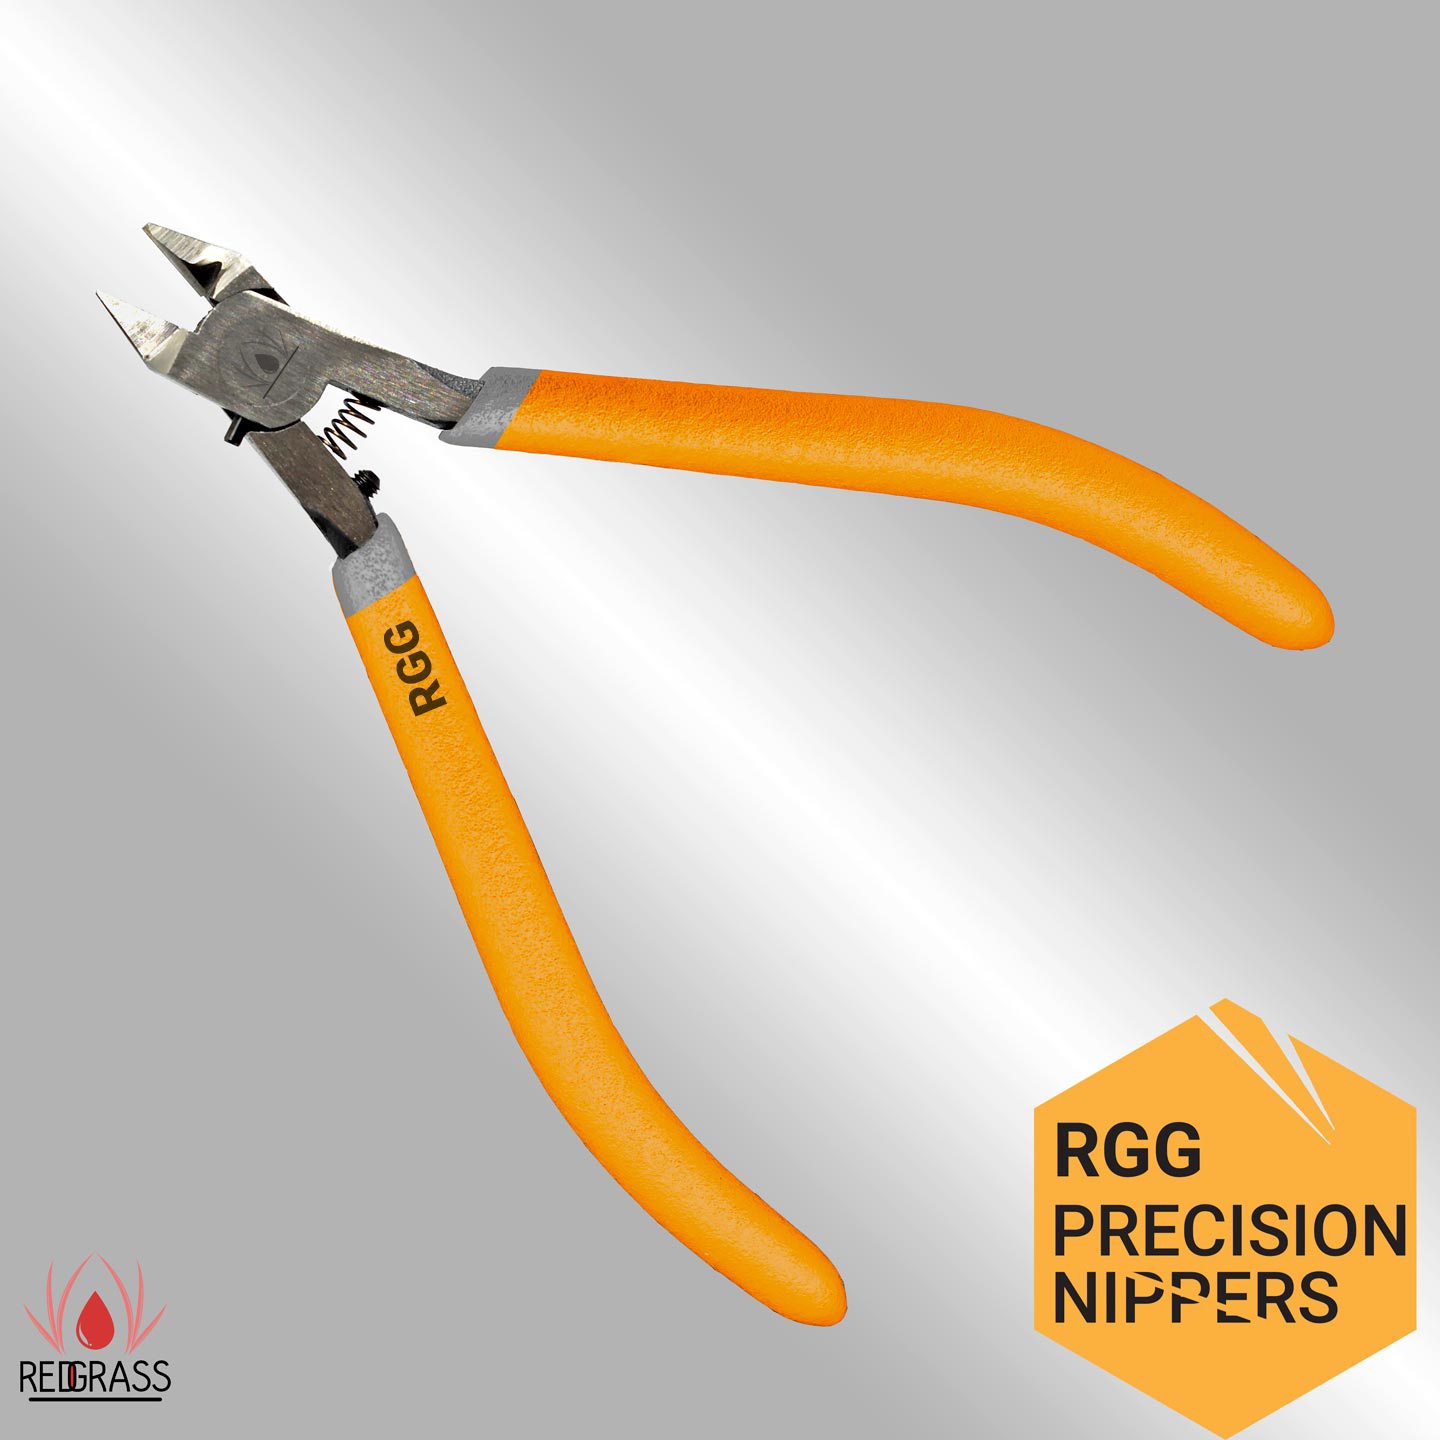 NEW! RGG PRECISION NIPPERS: perfect for a clean and precise cut